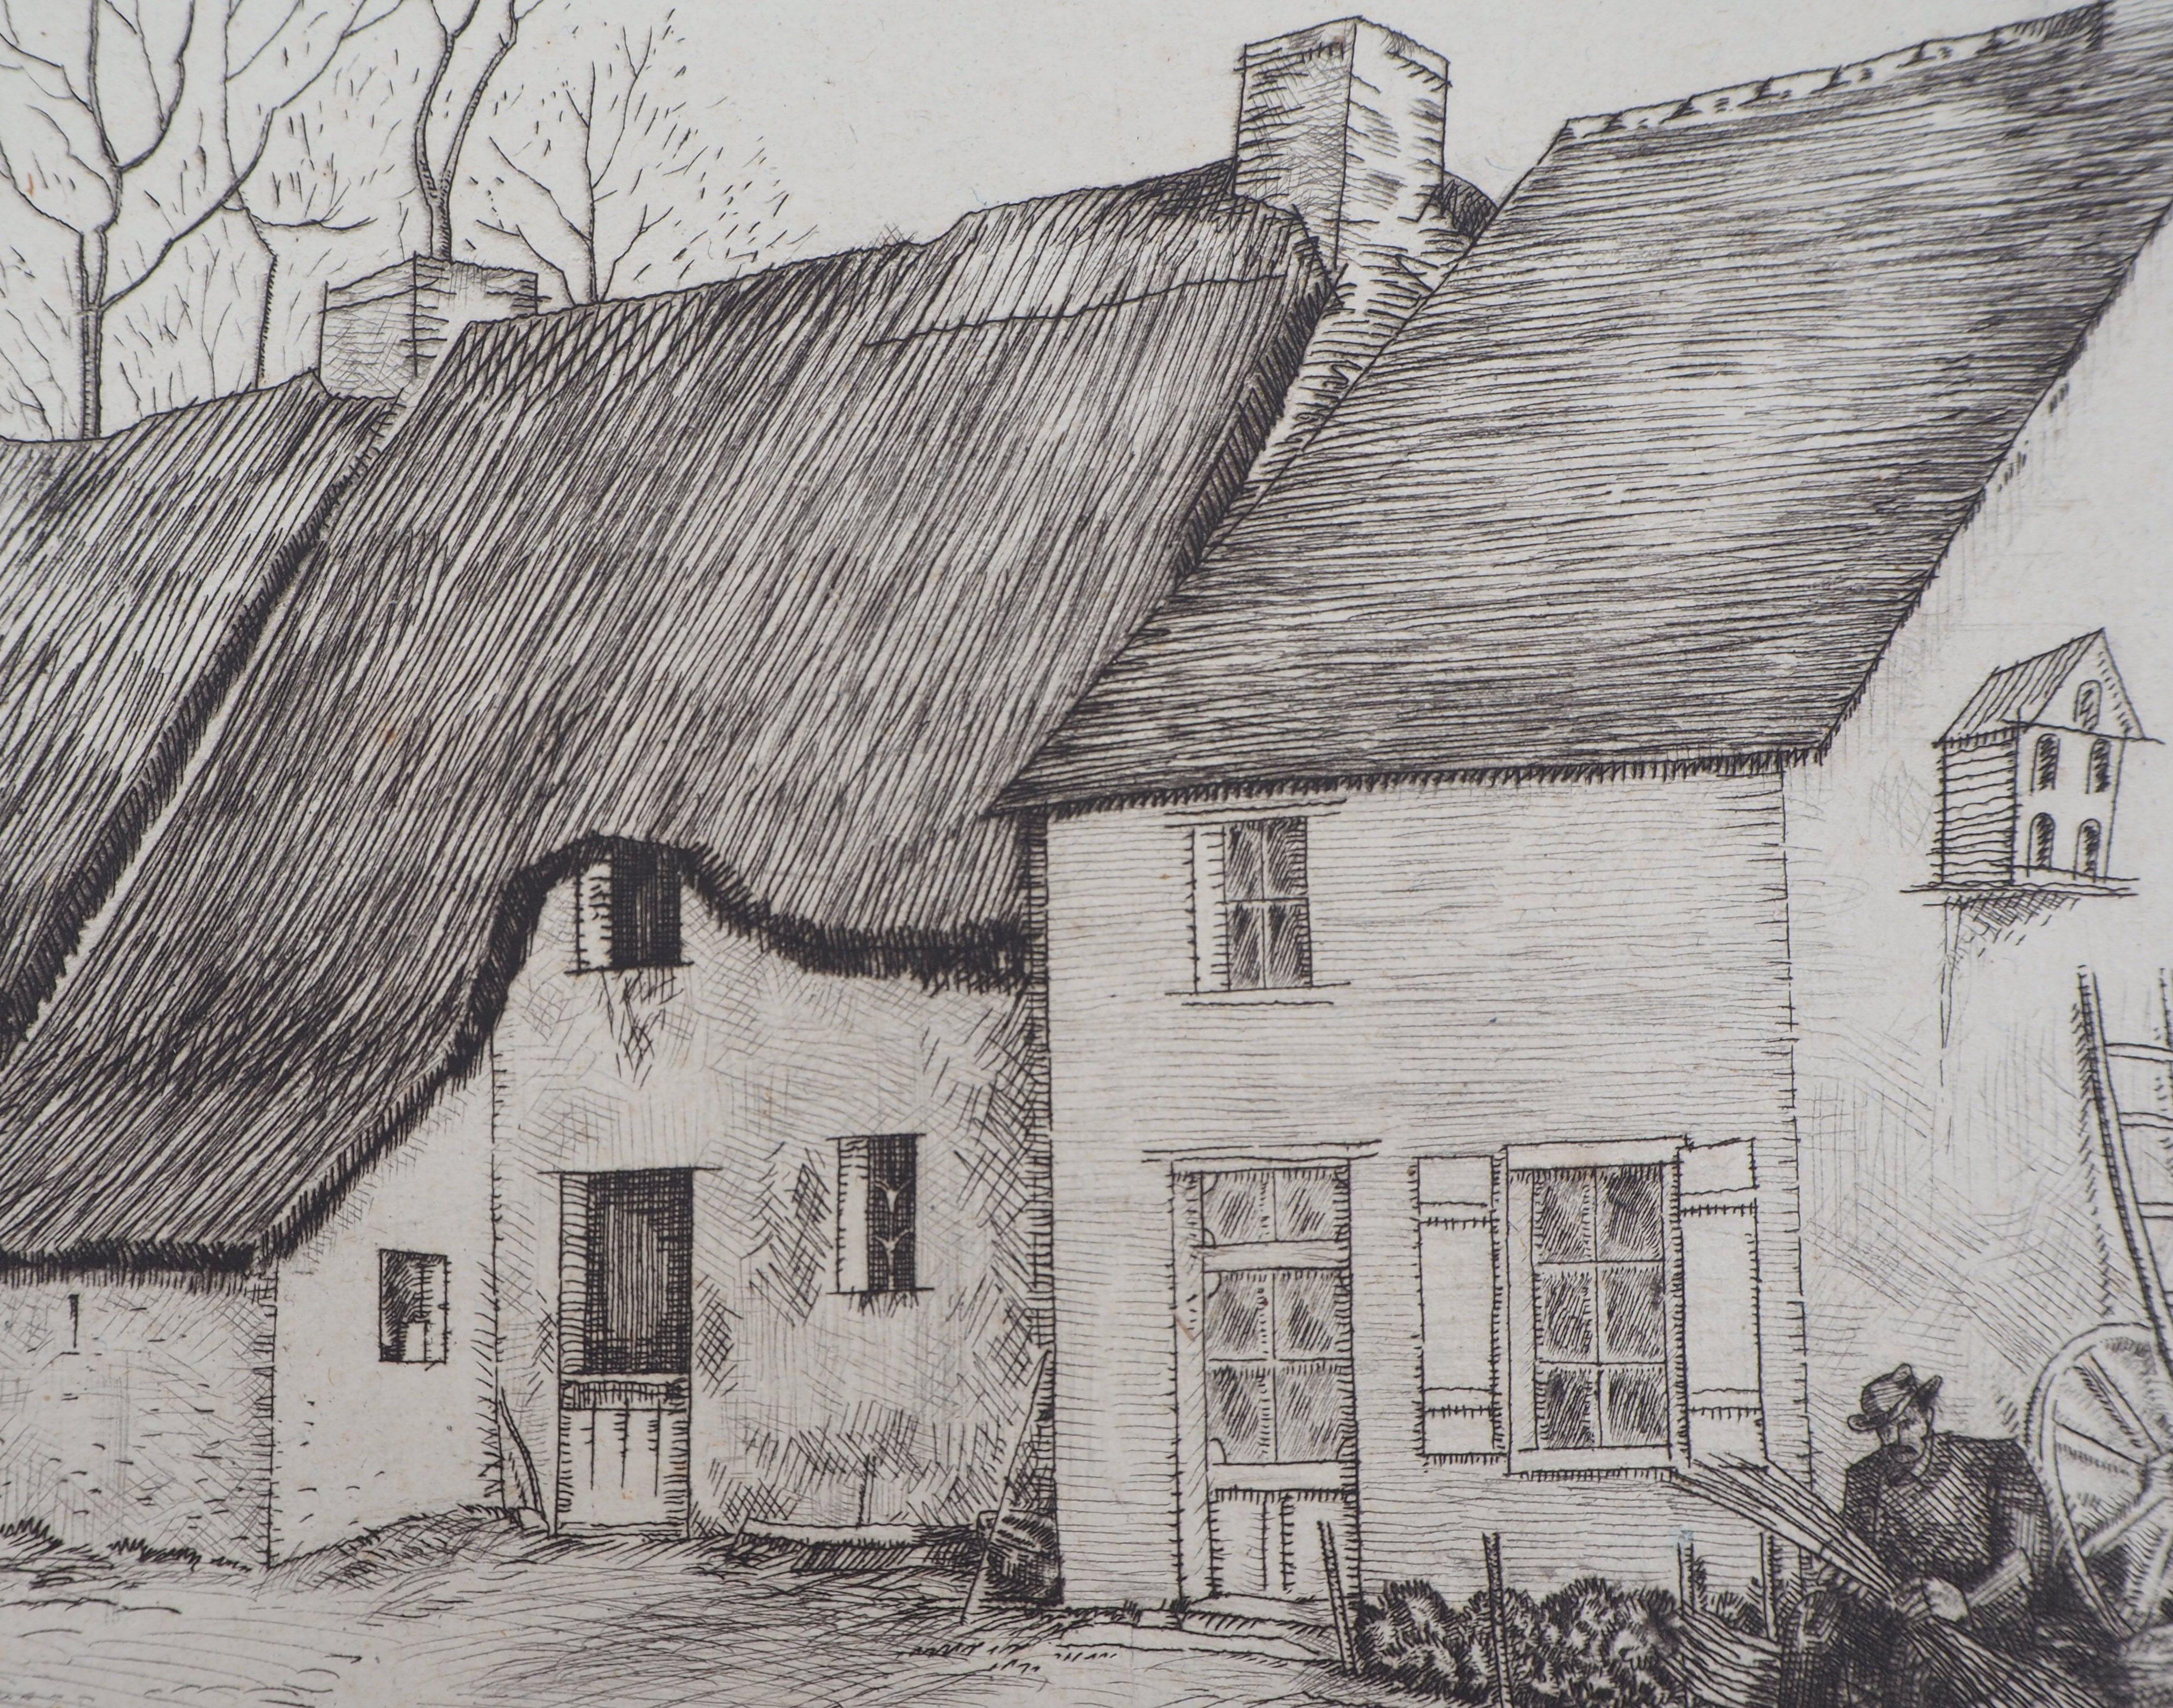 Jean Émile LABOUREUR
Houses in Brittany, c. 1935

Original etching
Signed in pencil by the artist
Numbered on / 32 copies
On vellum 32.5 x 30.5 cm (c. 13 x 16 inches)

REFERENCE : Catalog raisonne Sylvain Laboureur #245

Good condition, margins